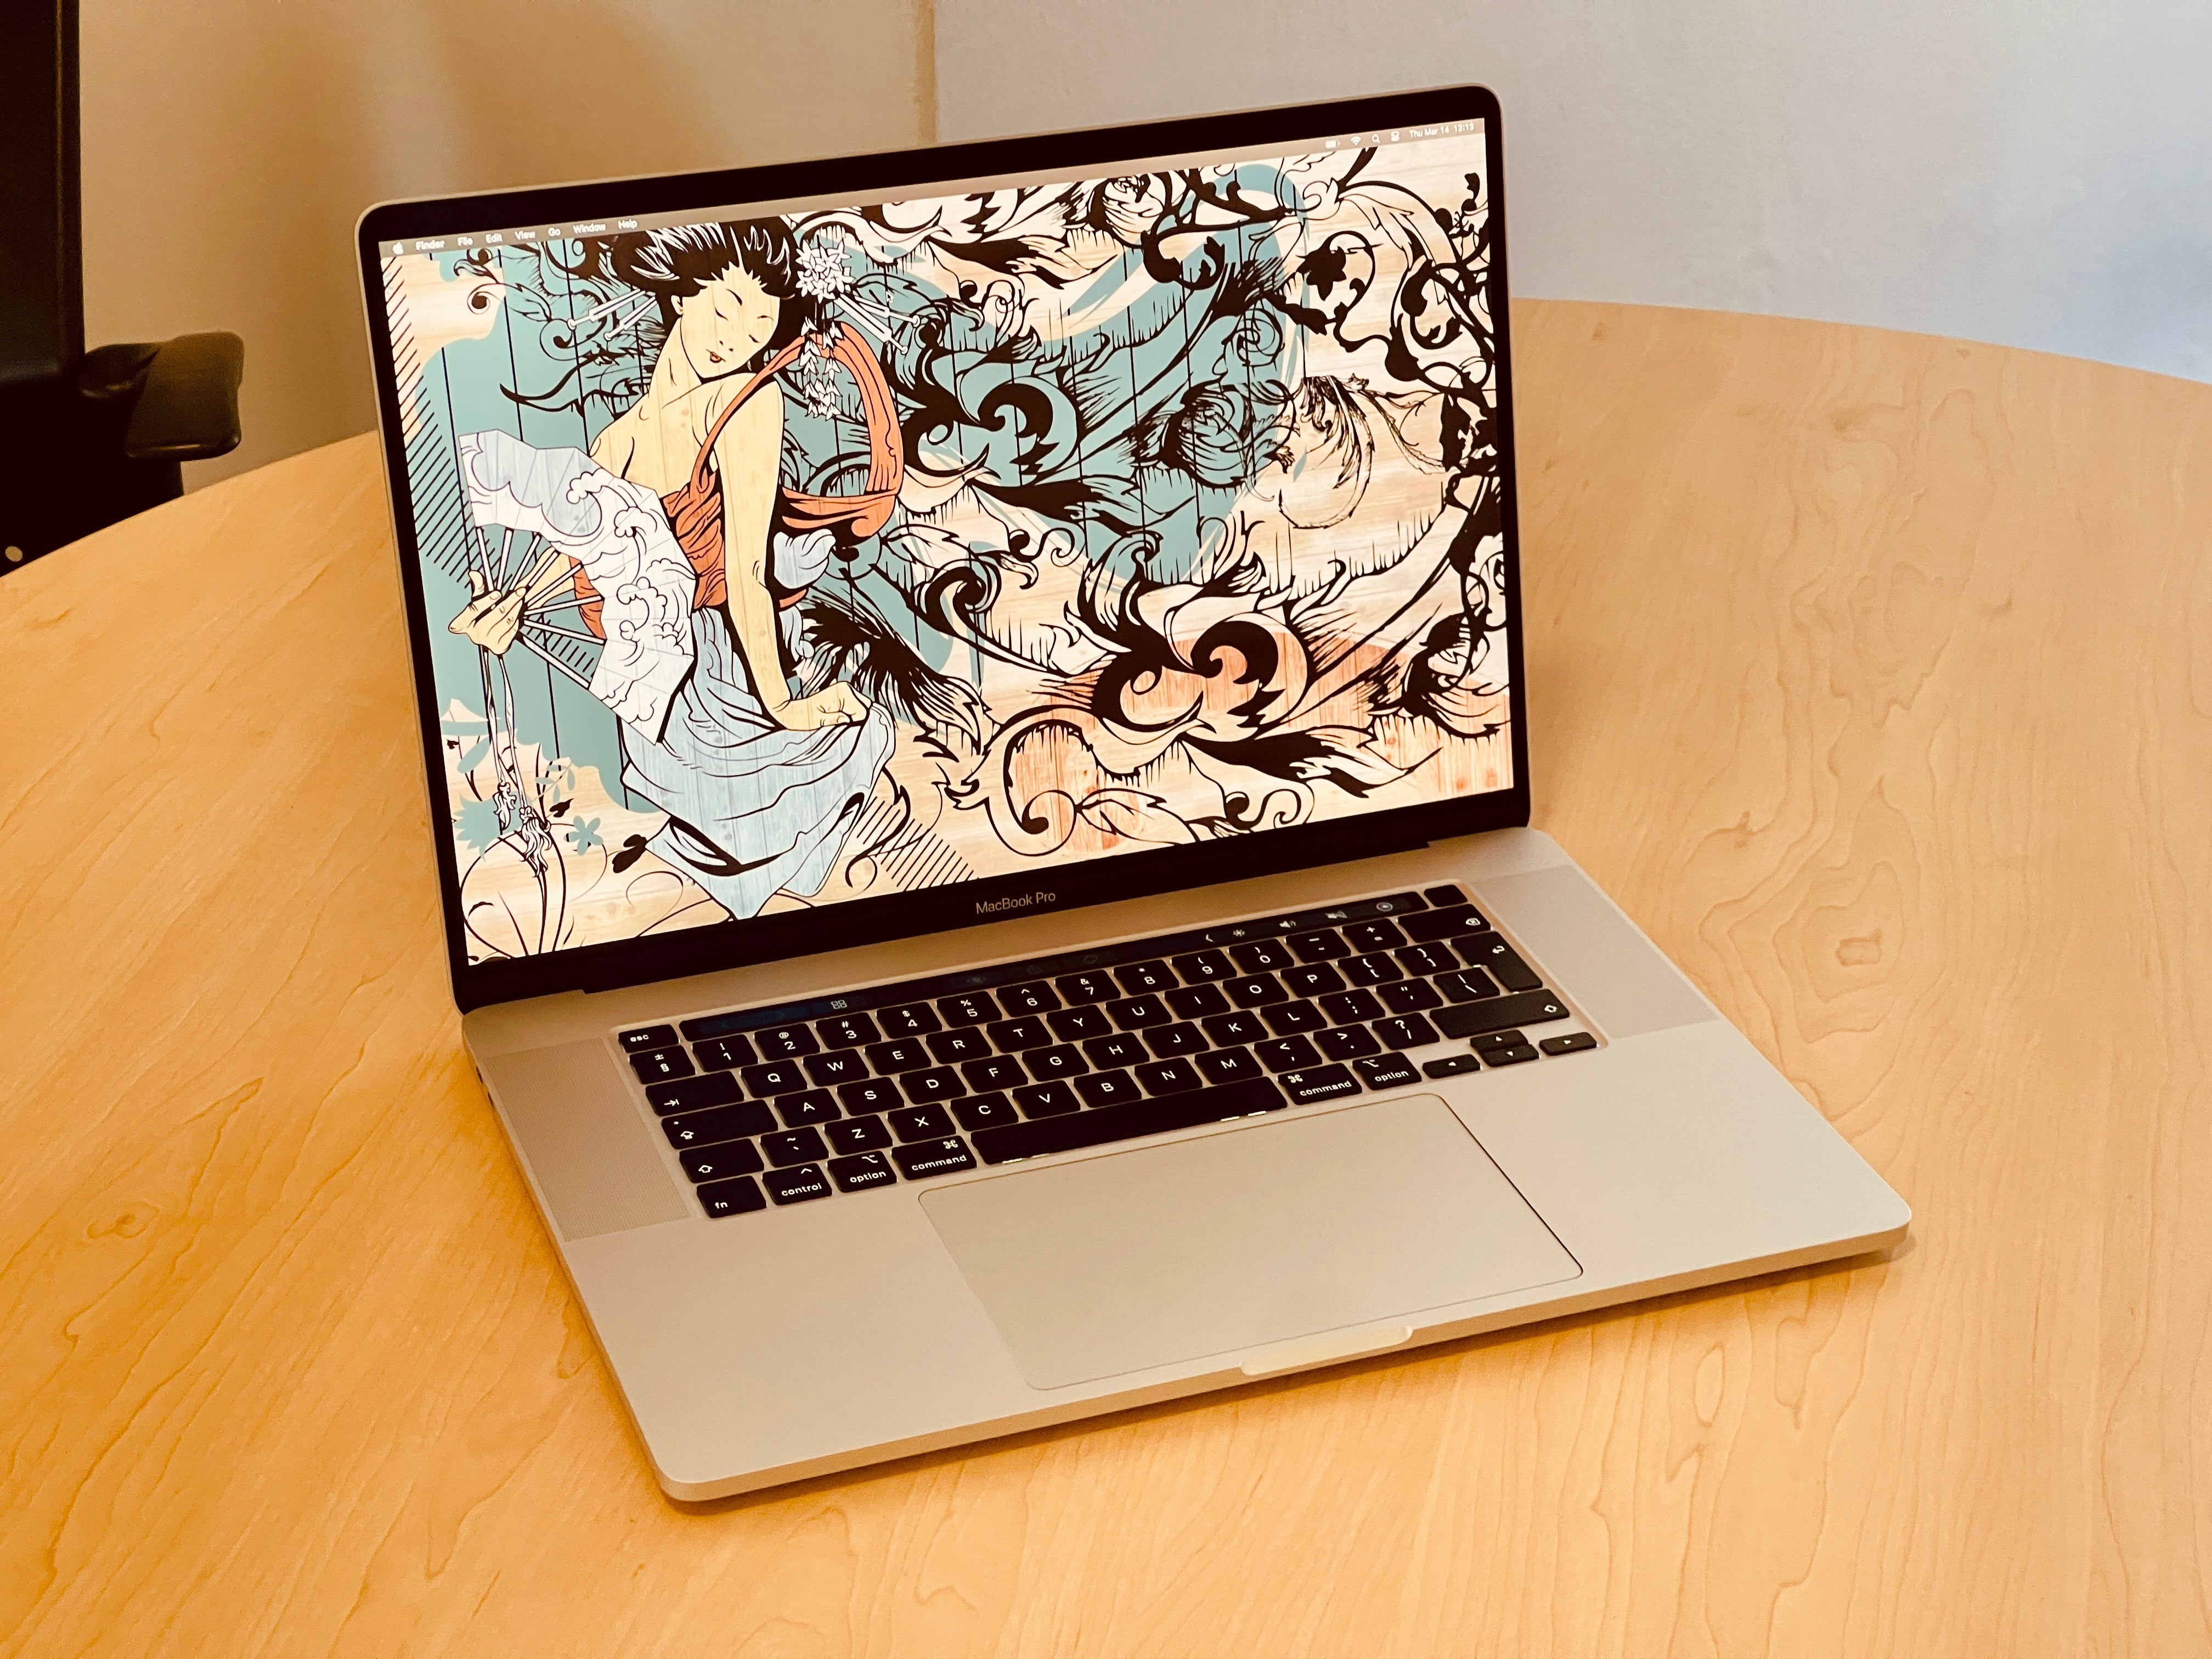 Apple MacBook Pro 15-inch 2.2GHz 6-Core i7 (Touch Bar, 16GB RAM, 256GB, Silver) - Pre Owned / 3 Month Warranty - Mac Shack